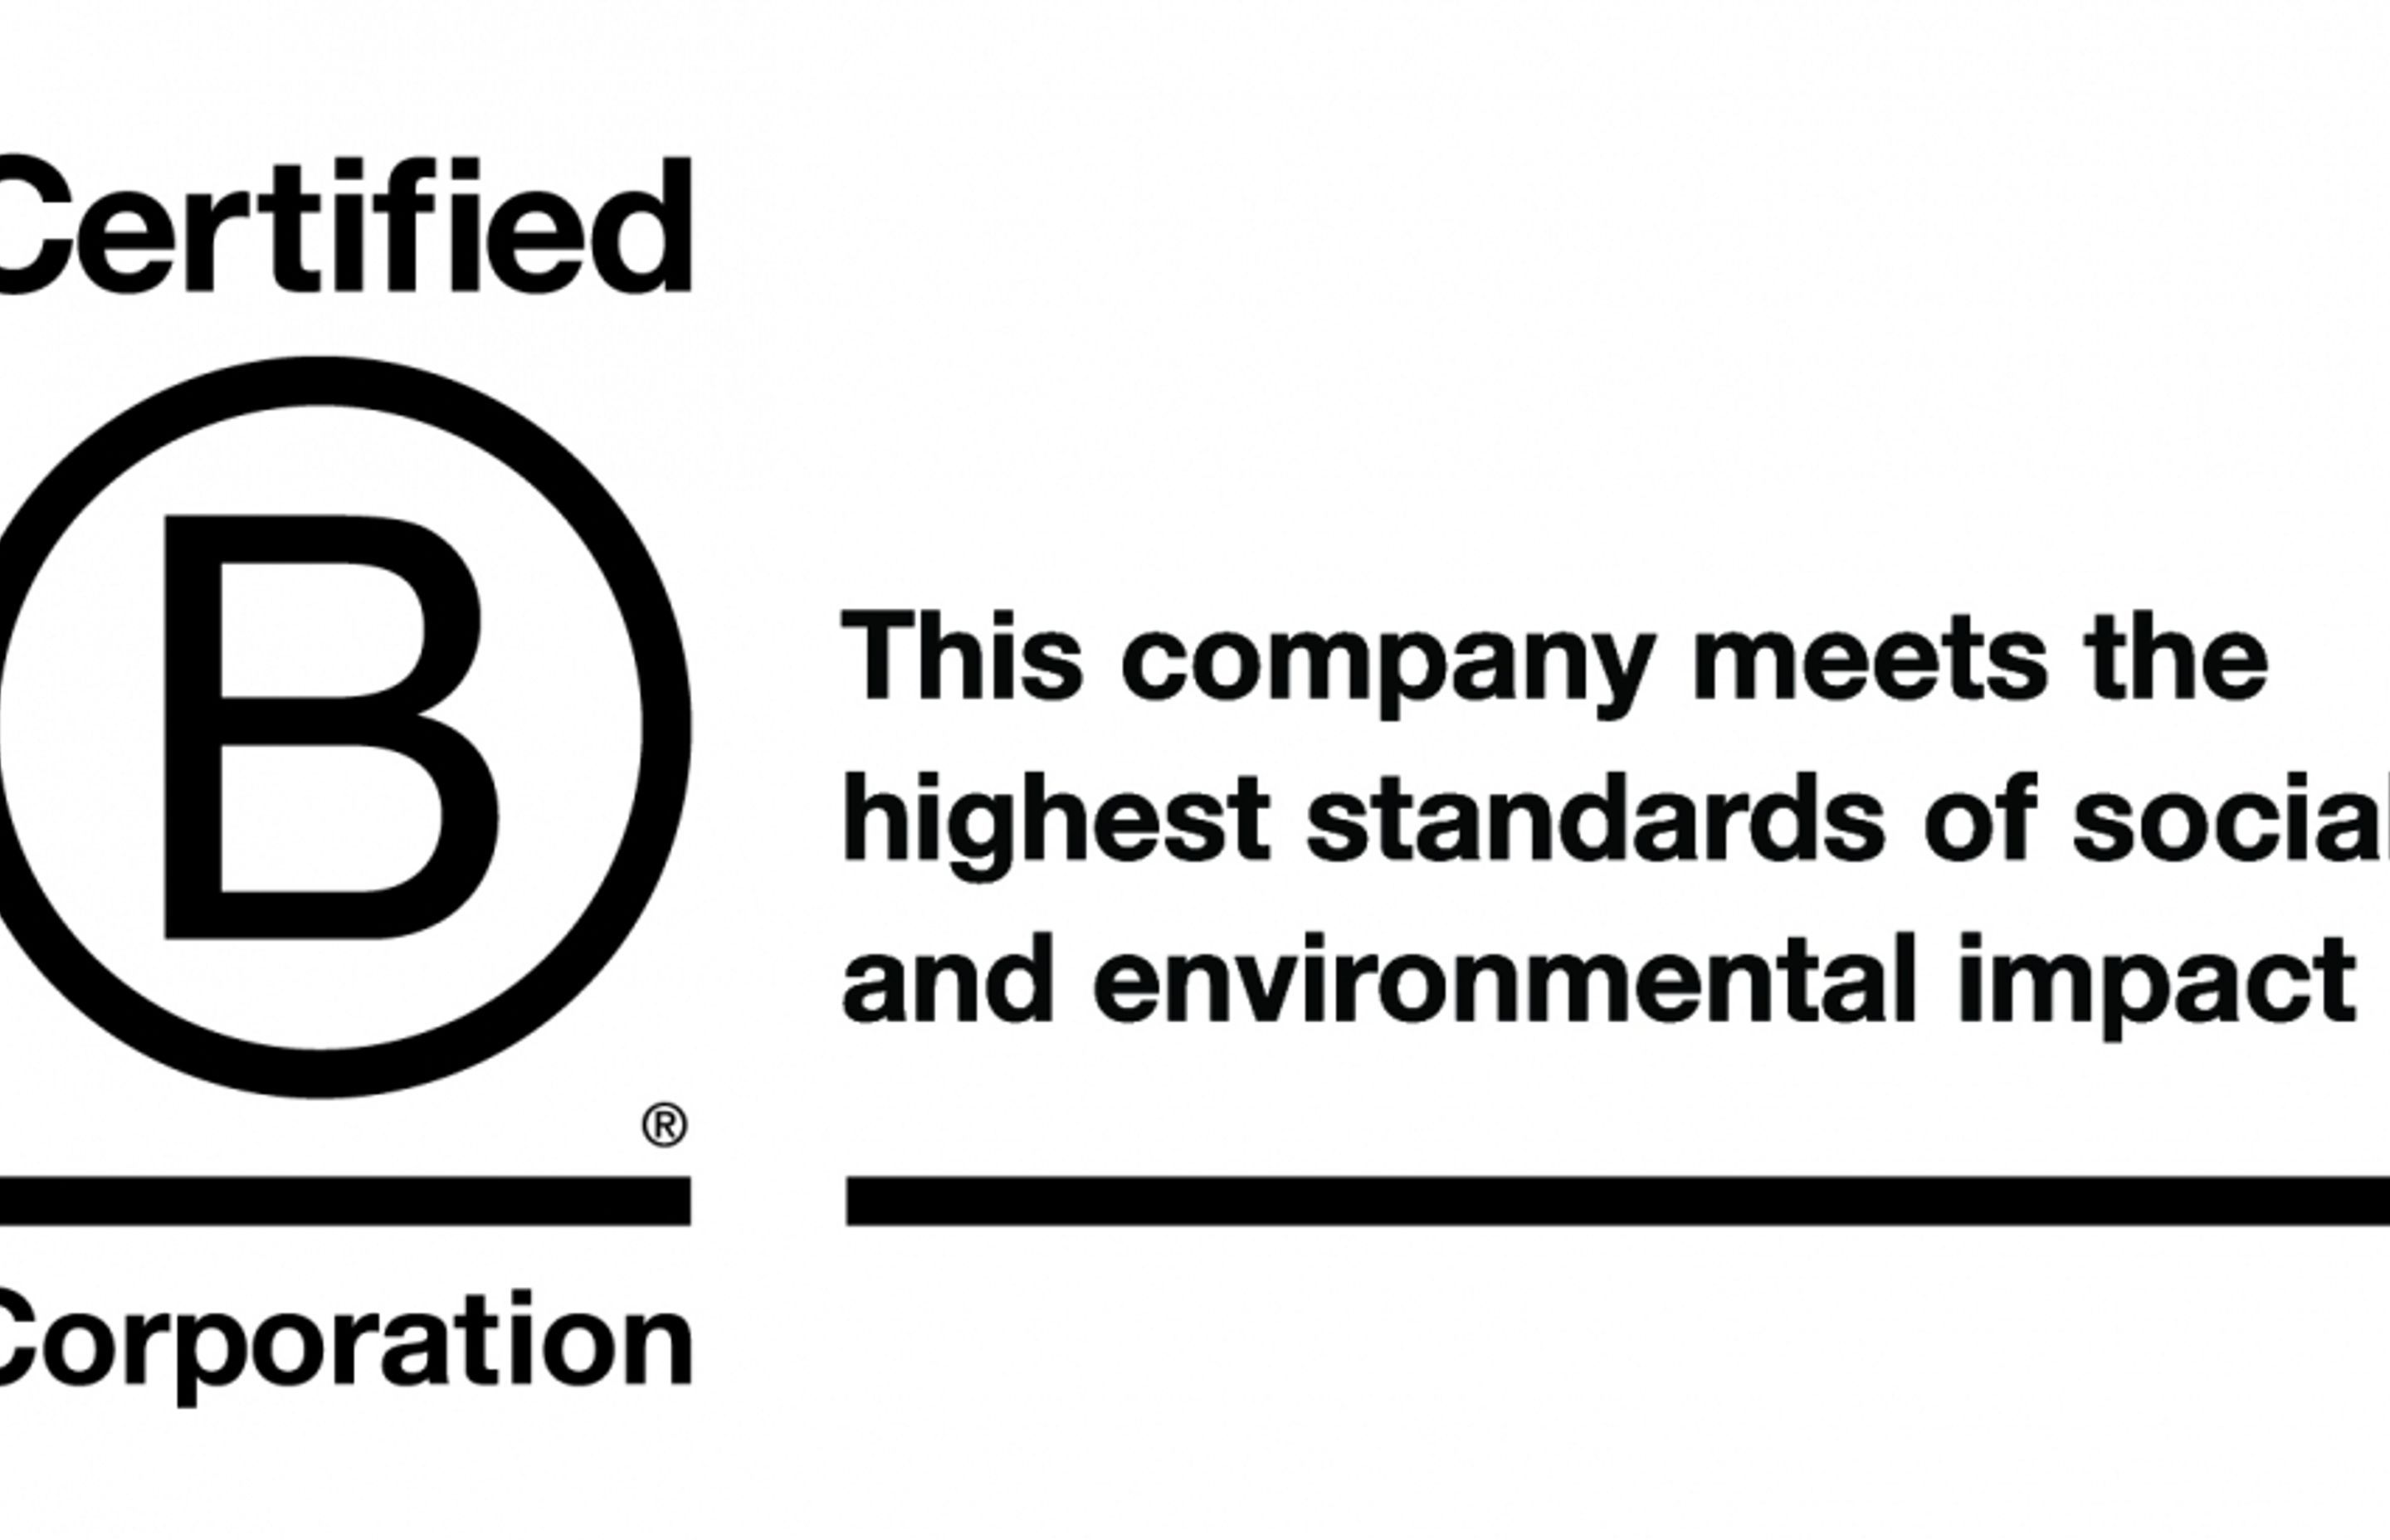 We are a B-Corporation